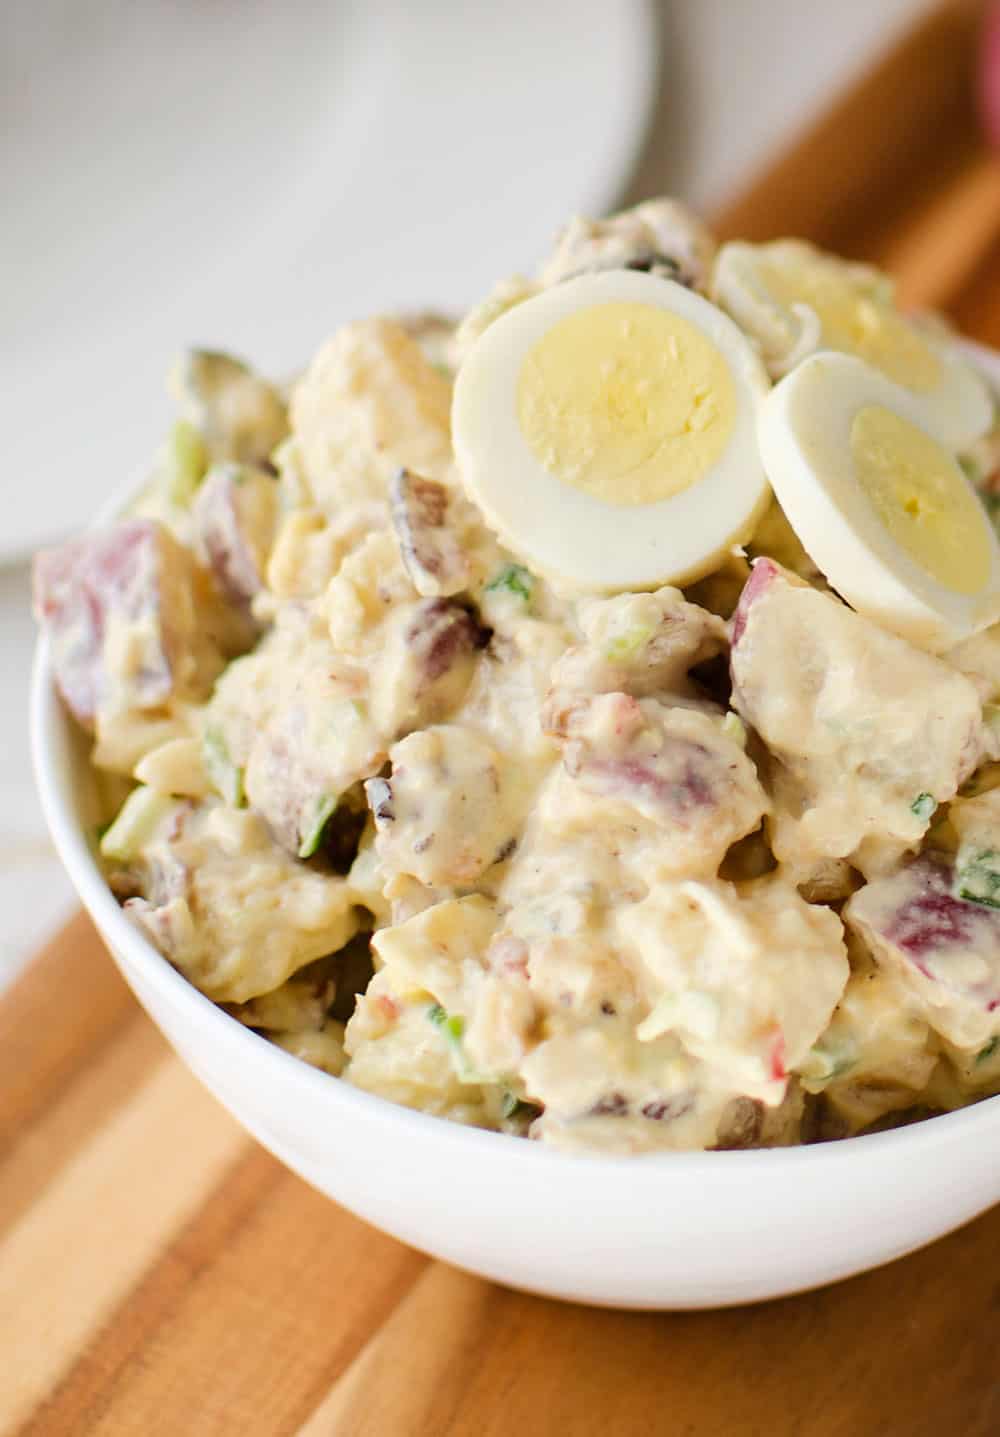 Roasted Garlic & Red Skin Potato Salad is a delicious twist on creamy potato salad with roasted garlic and bacon. This hearty salad is sure to be a hit at your next picnic or potluck!